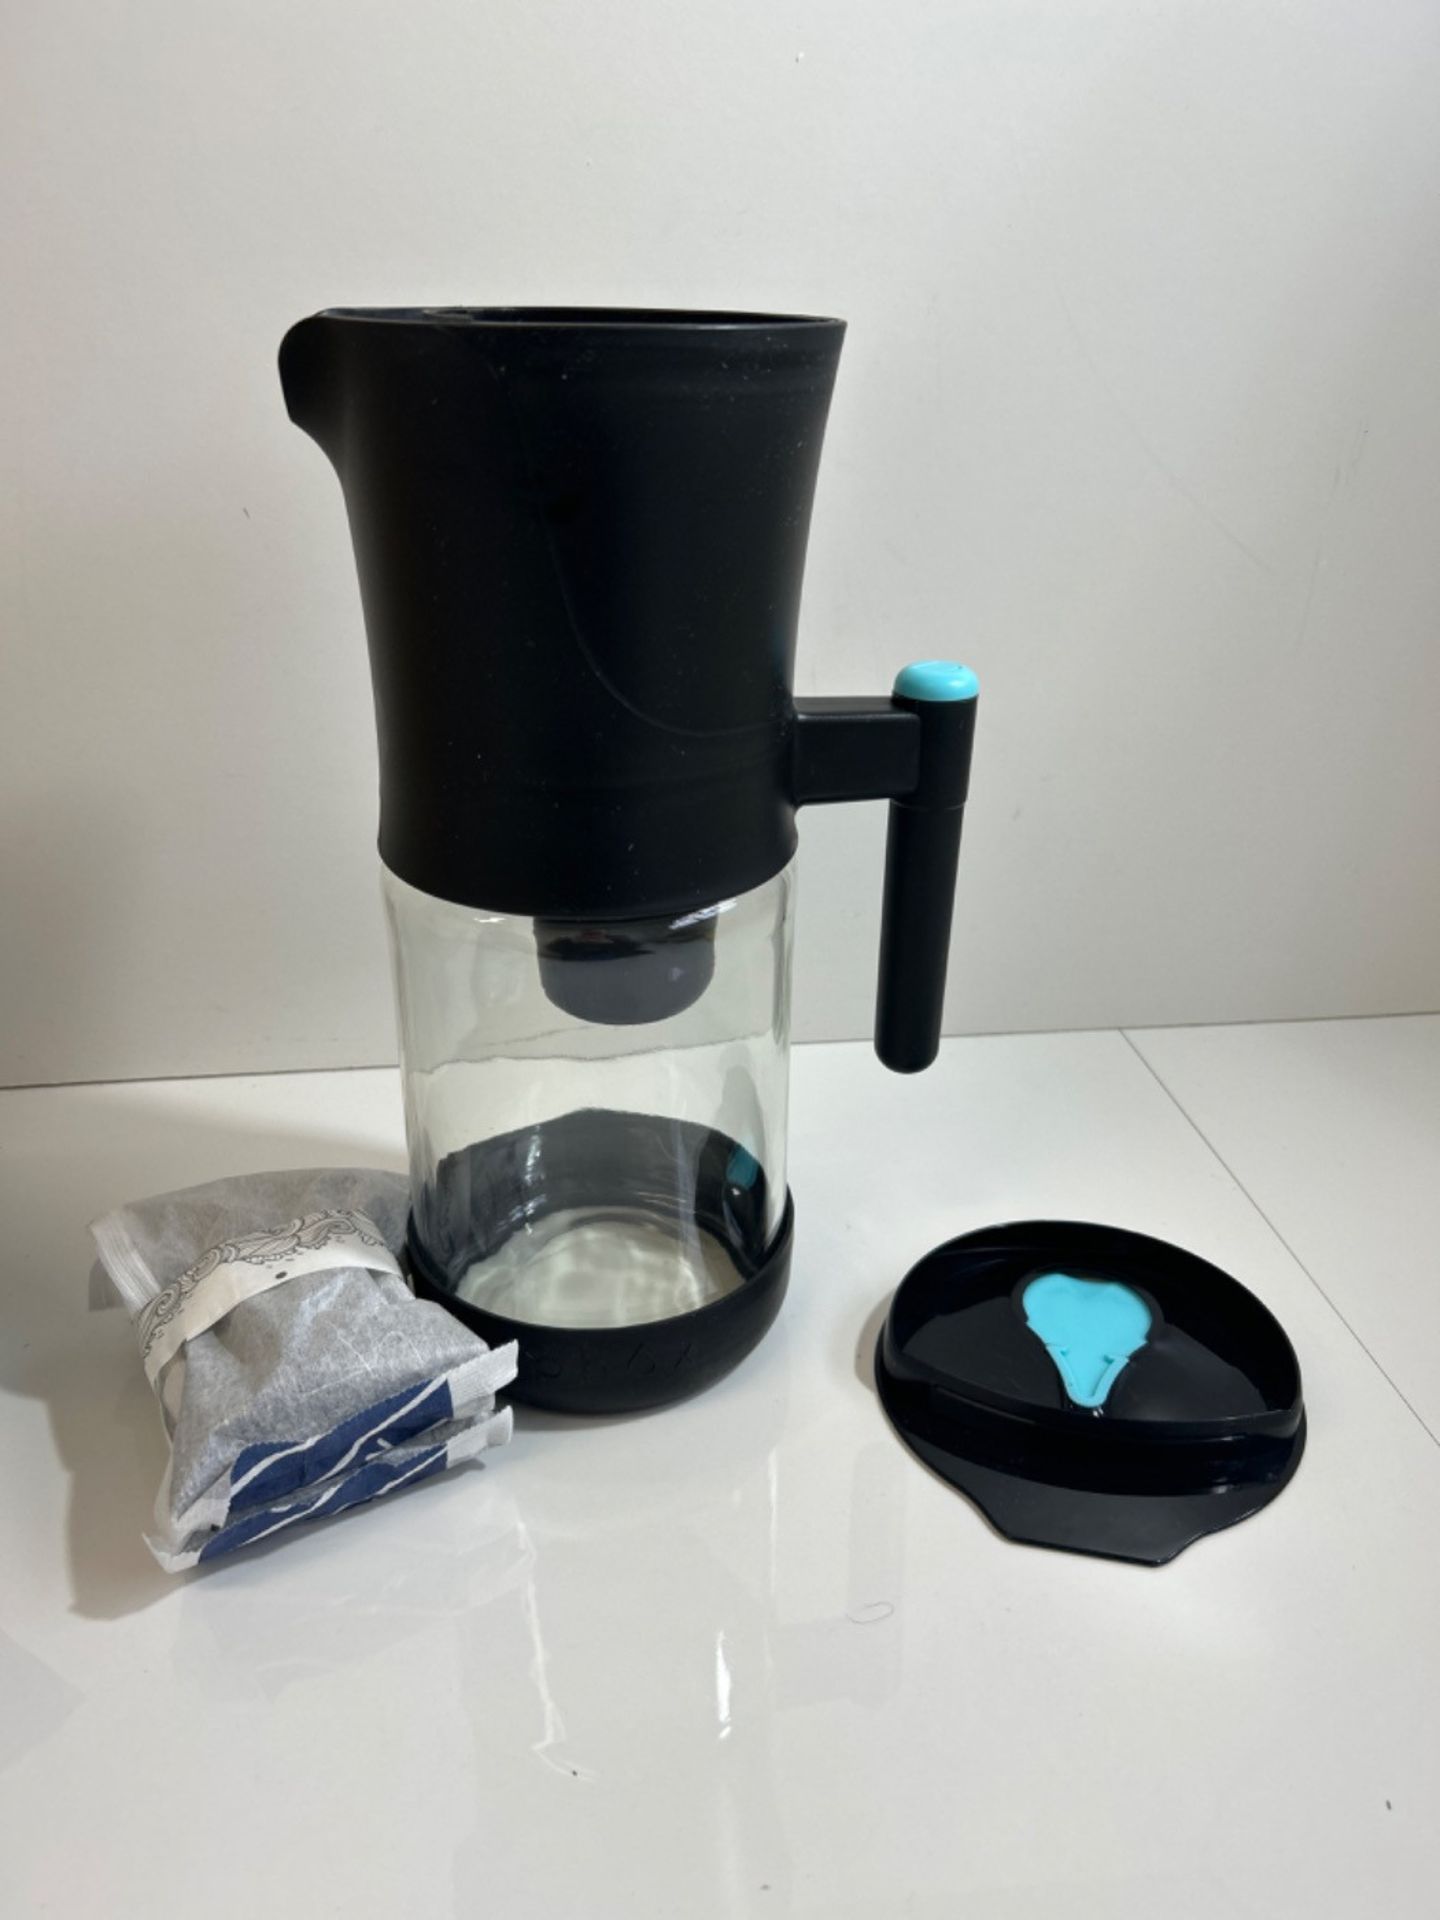 Phox V2 Water Filter | 2.2L Glass Water Filter Jug and Cartridge | 3 Month Supply (Clean Pack) - Image 3 of 3